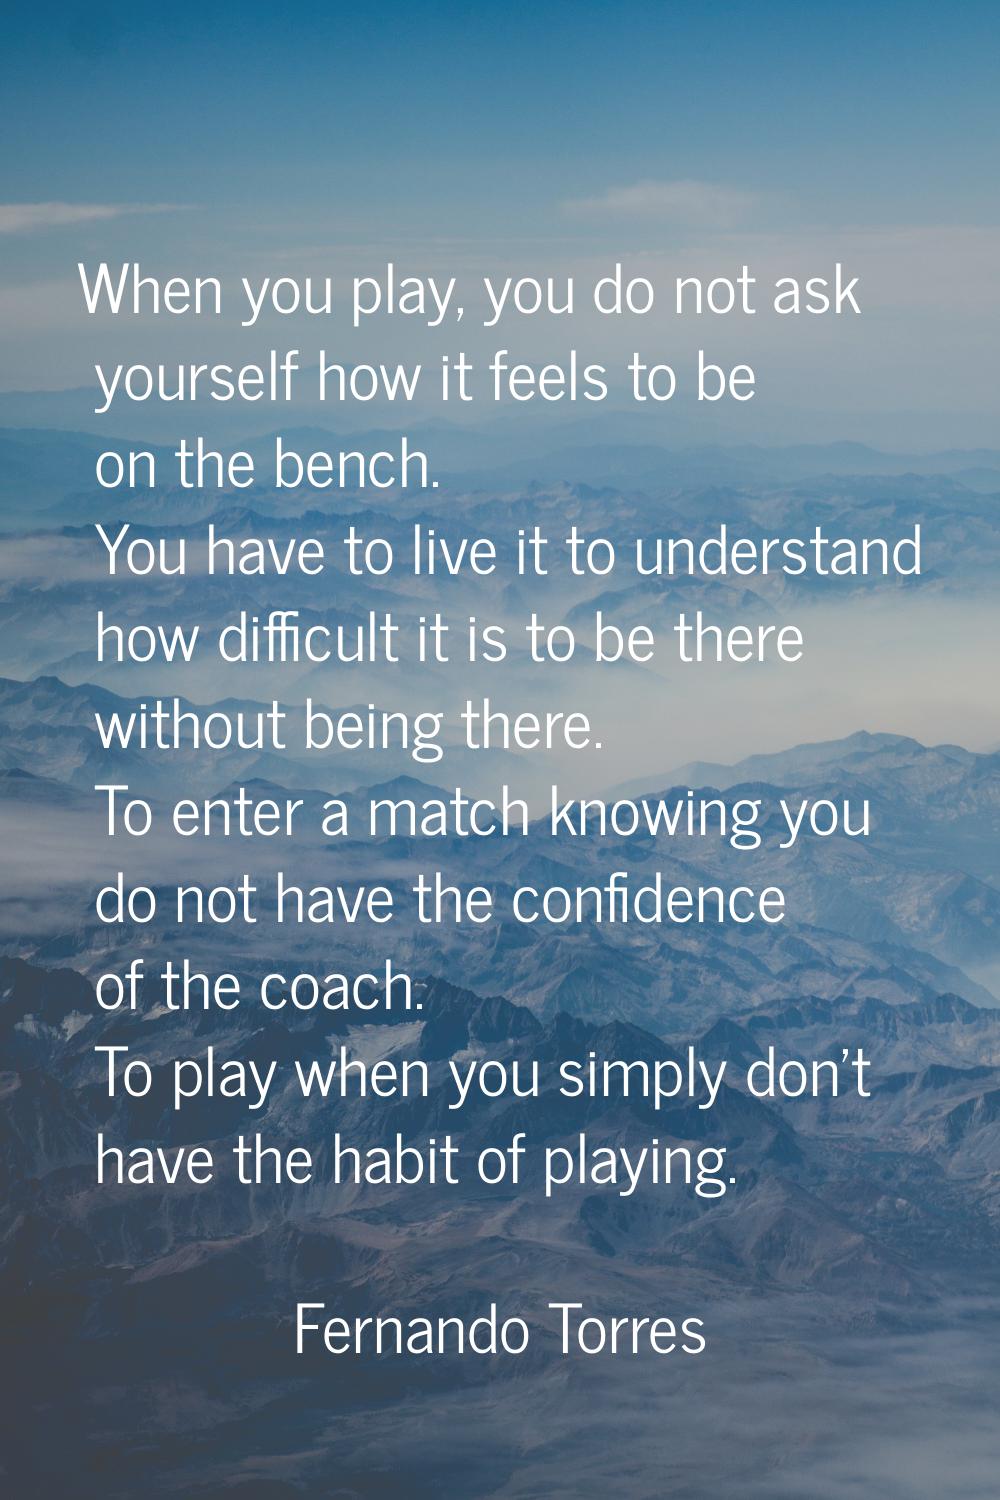 When you play, you do not ask yourself how it feels to be on the bench. You have to live it to unde